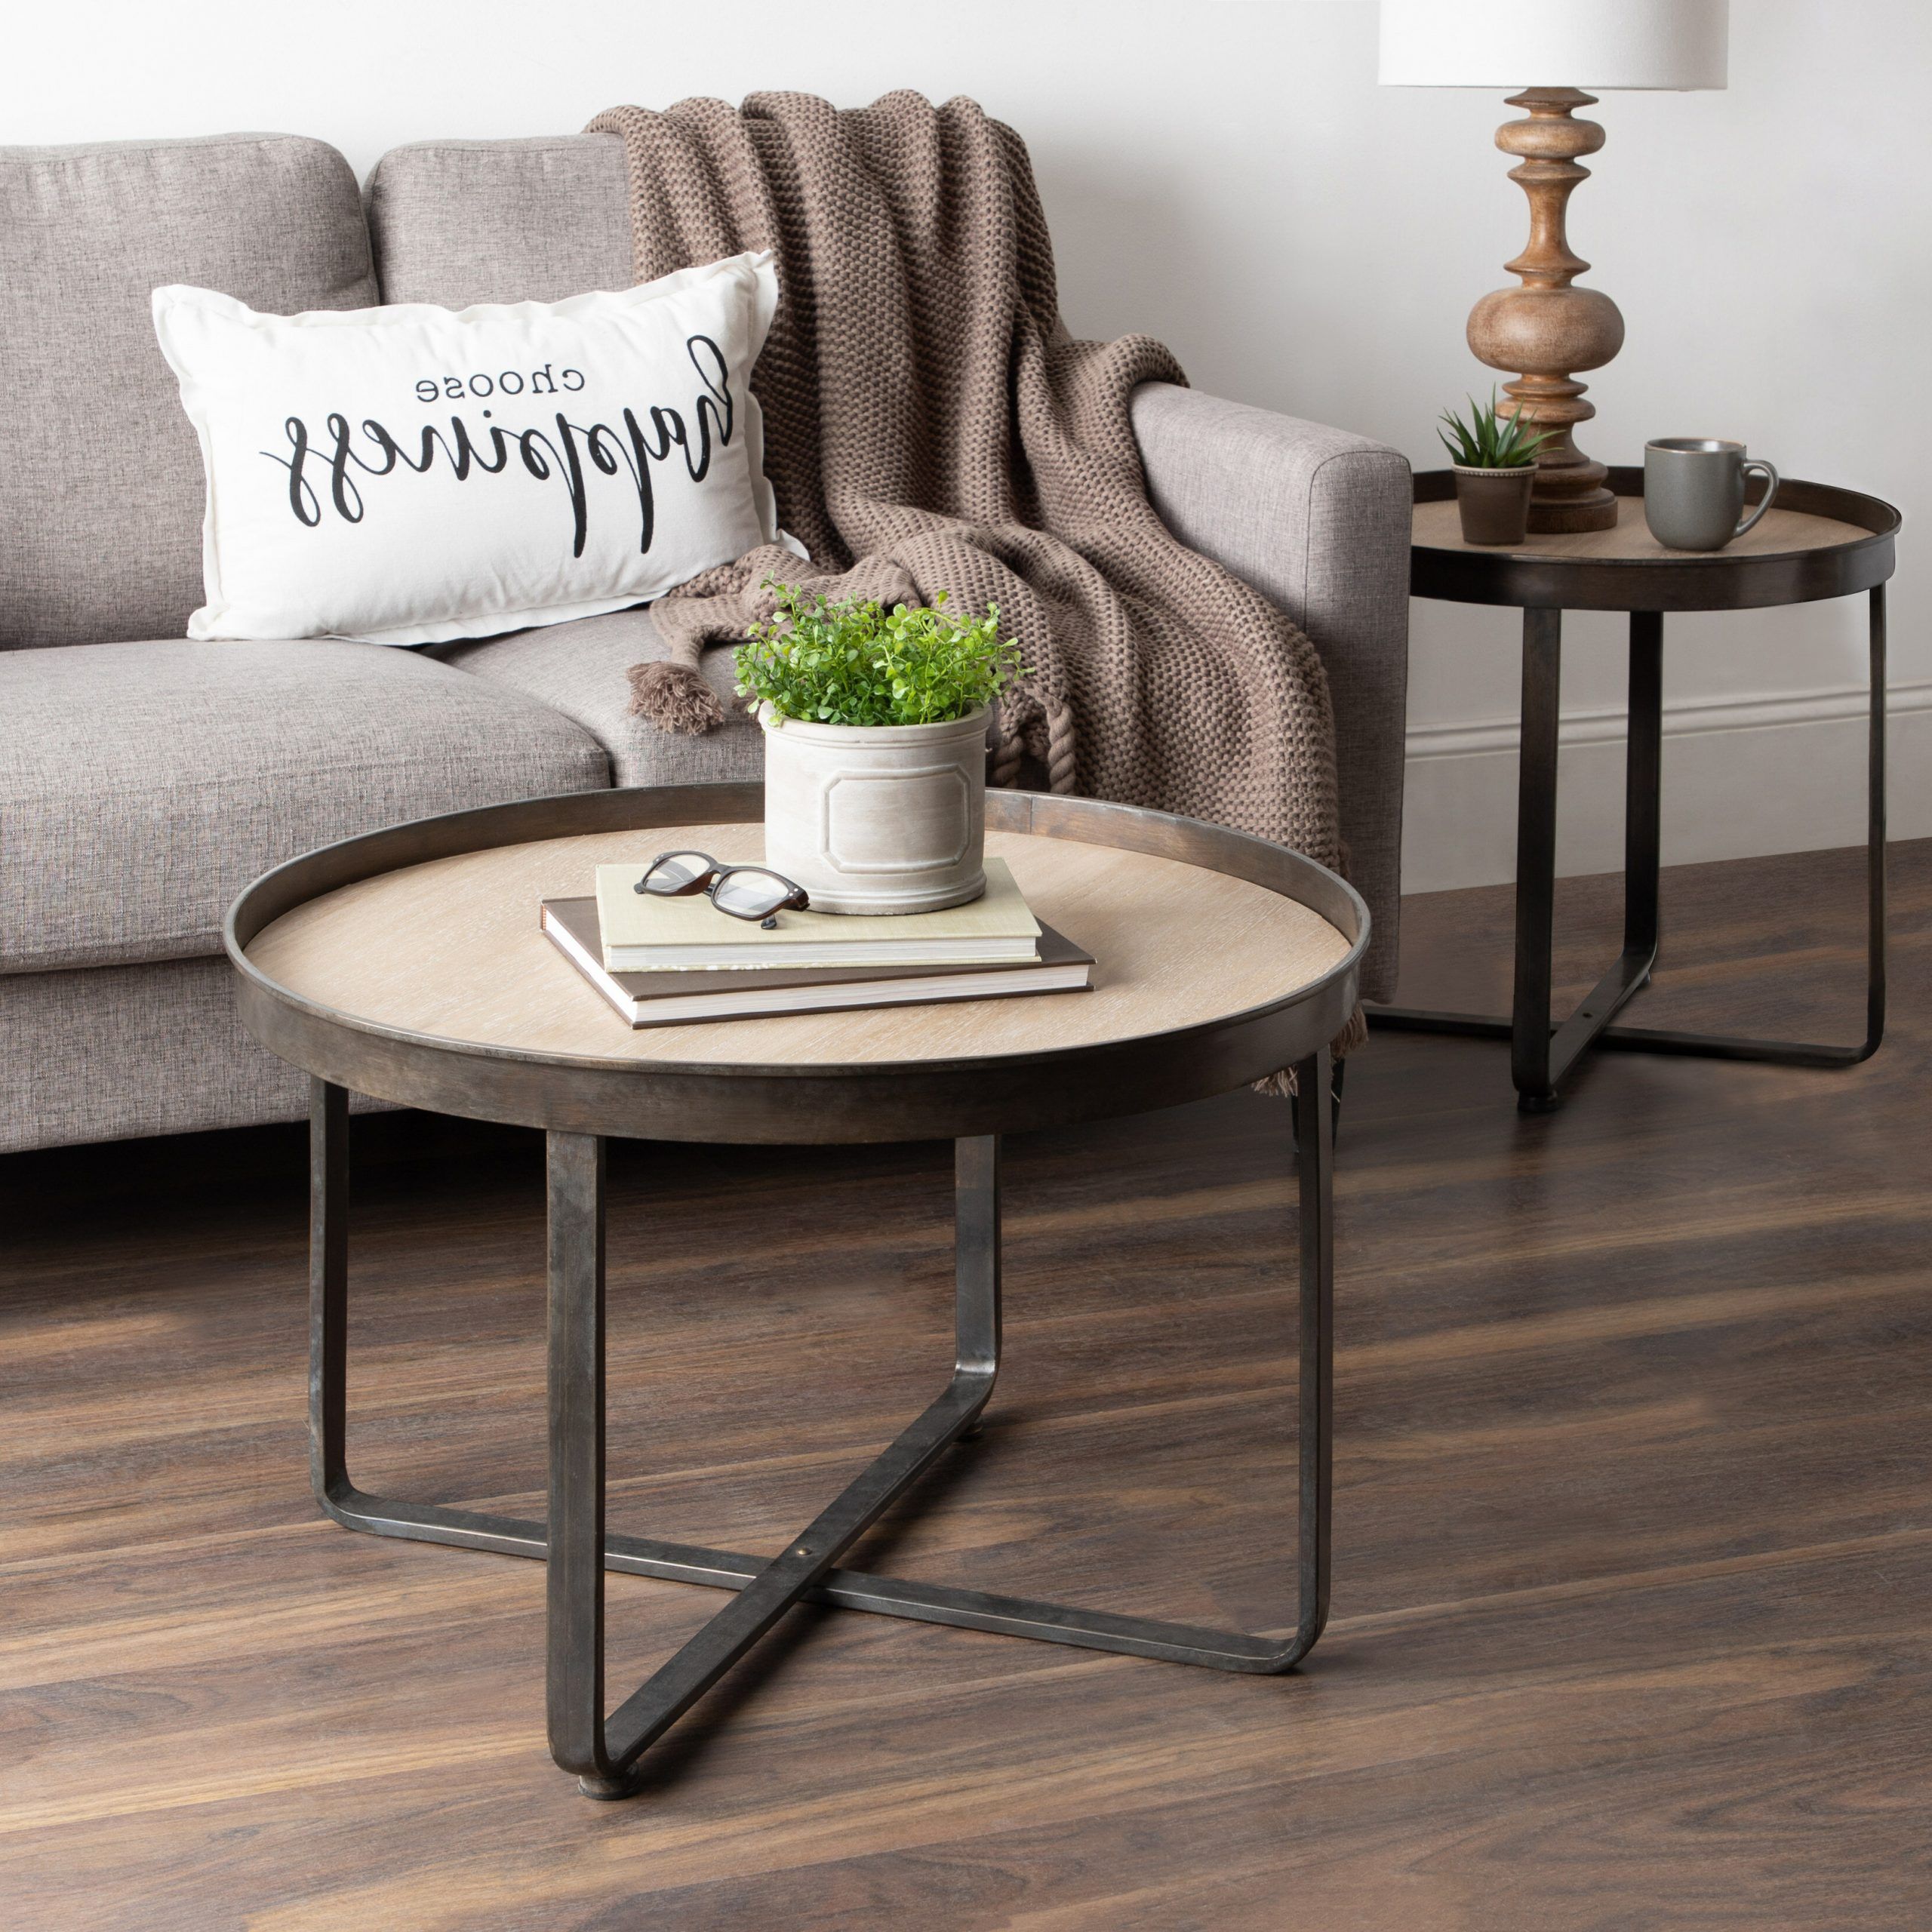 2019 2 Piece Coffee Tables Throughout Mercury Row® Quiles 2 Piece Coffee Table Set & Reviews (View 15 of 20)